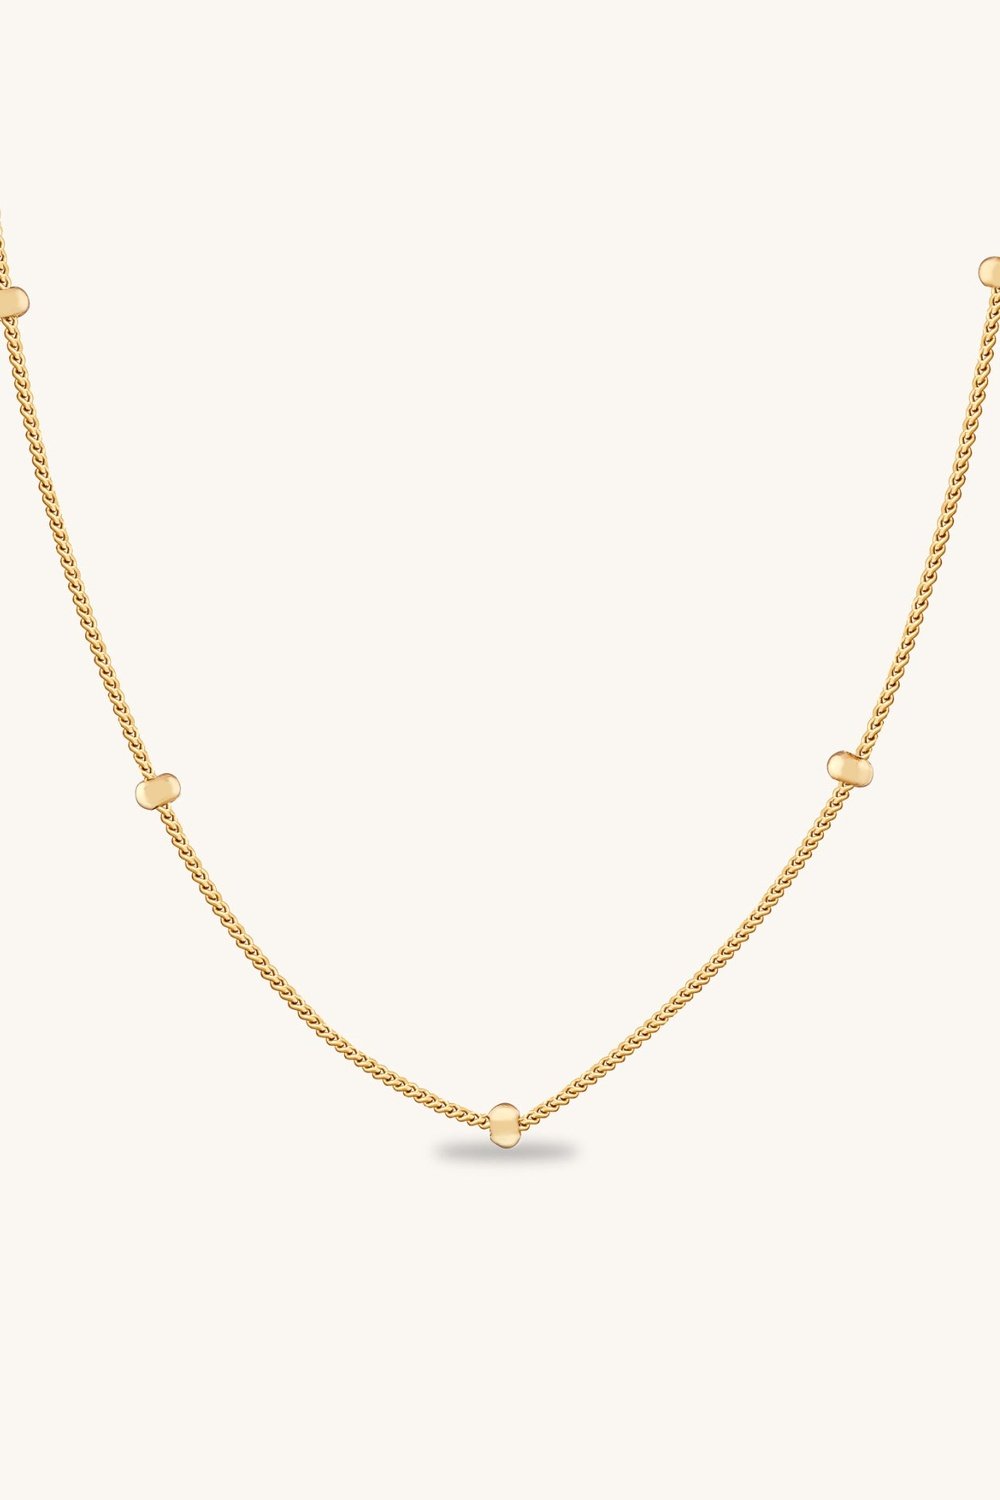 Tiny Beads Subtle Chain Necklace